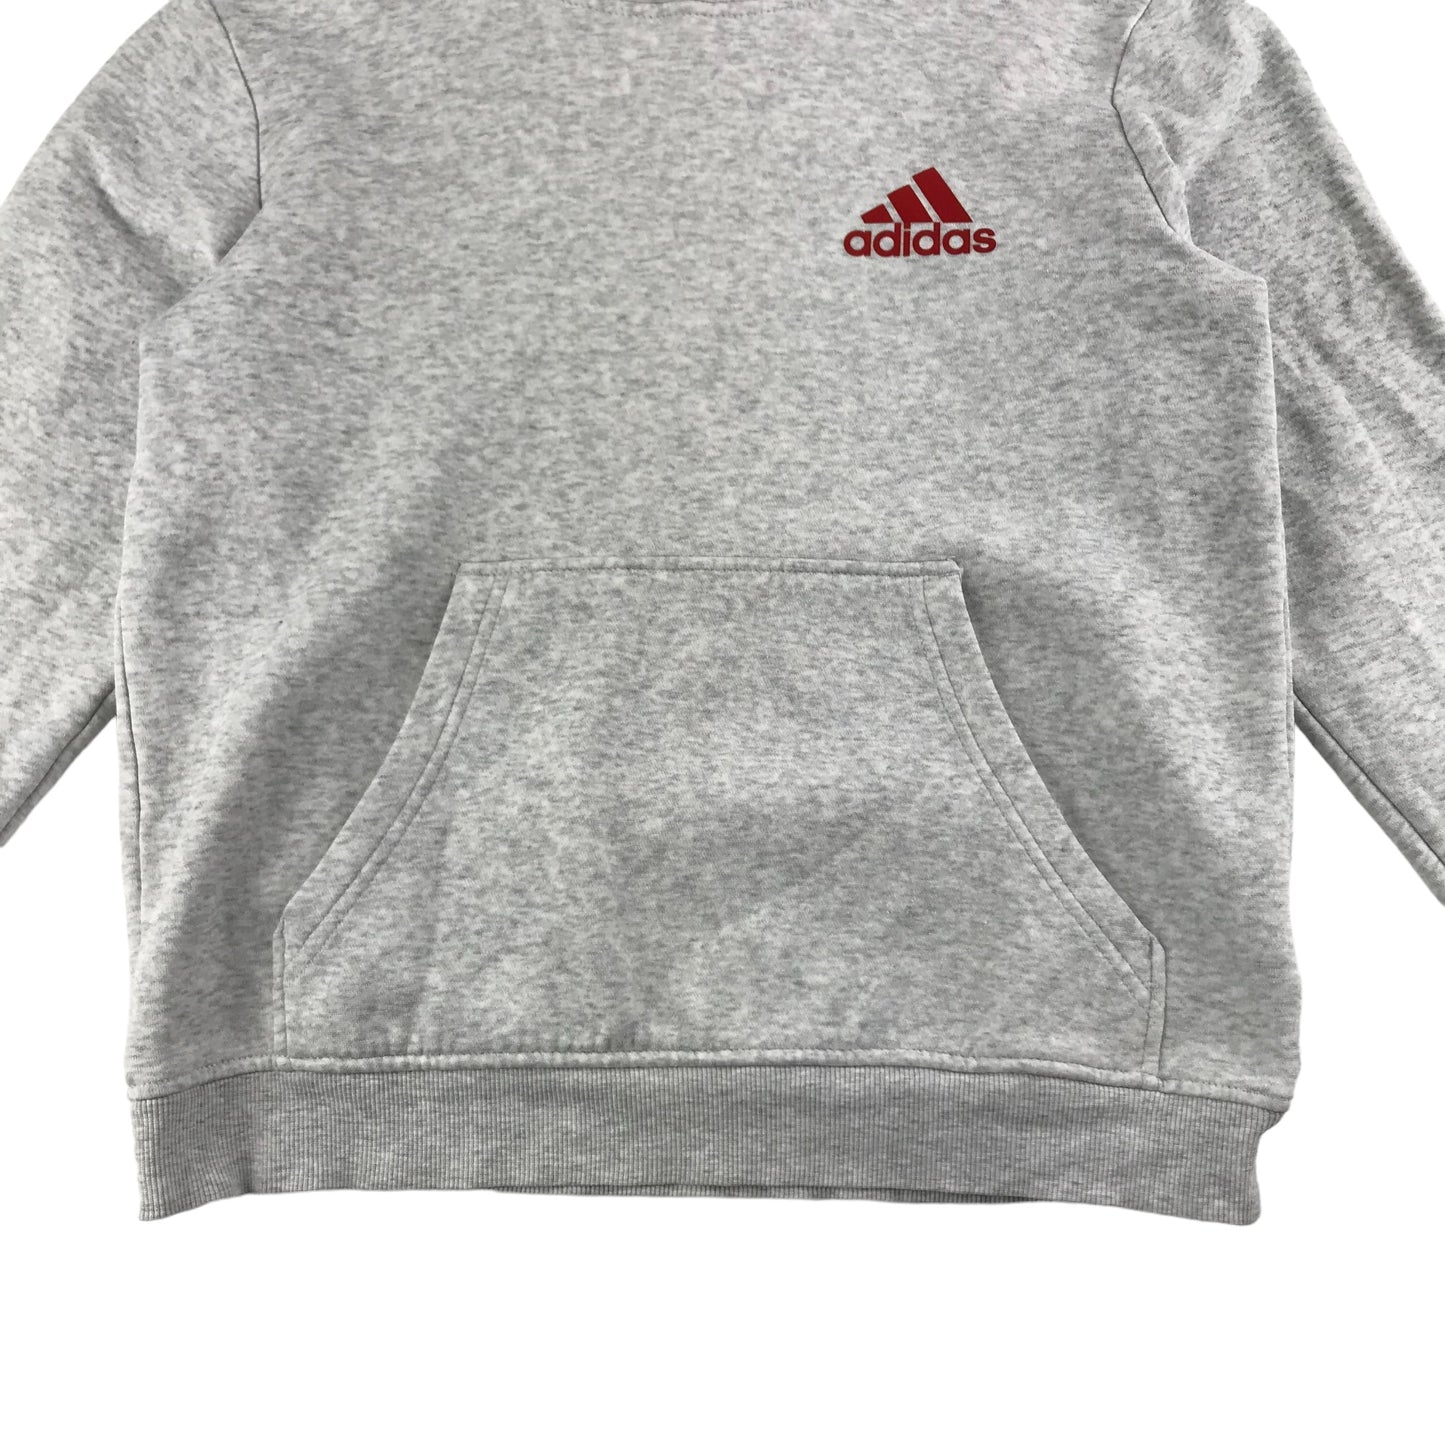 Adidas Hoodie Age 11 Light Grey Pullover Jersey with Red Lining and Logo